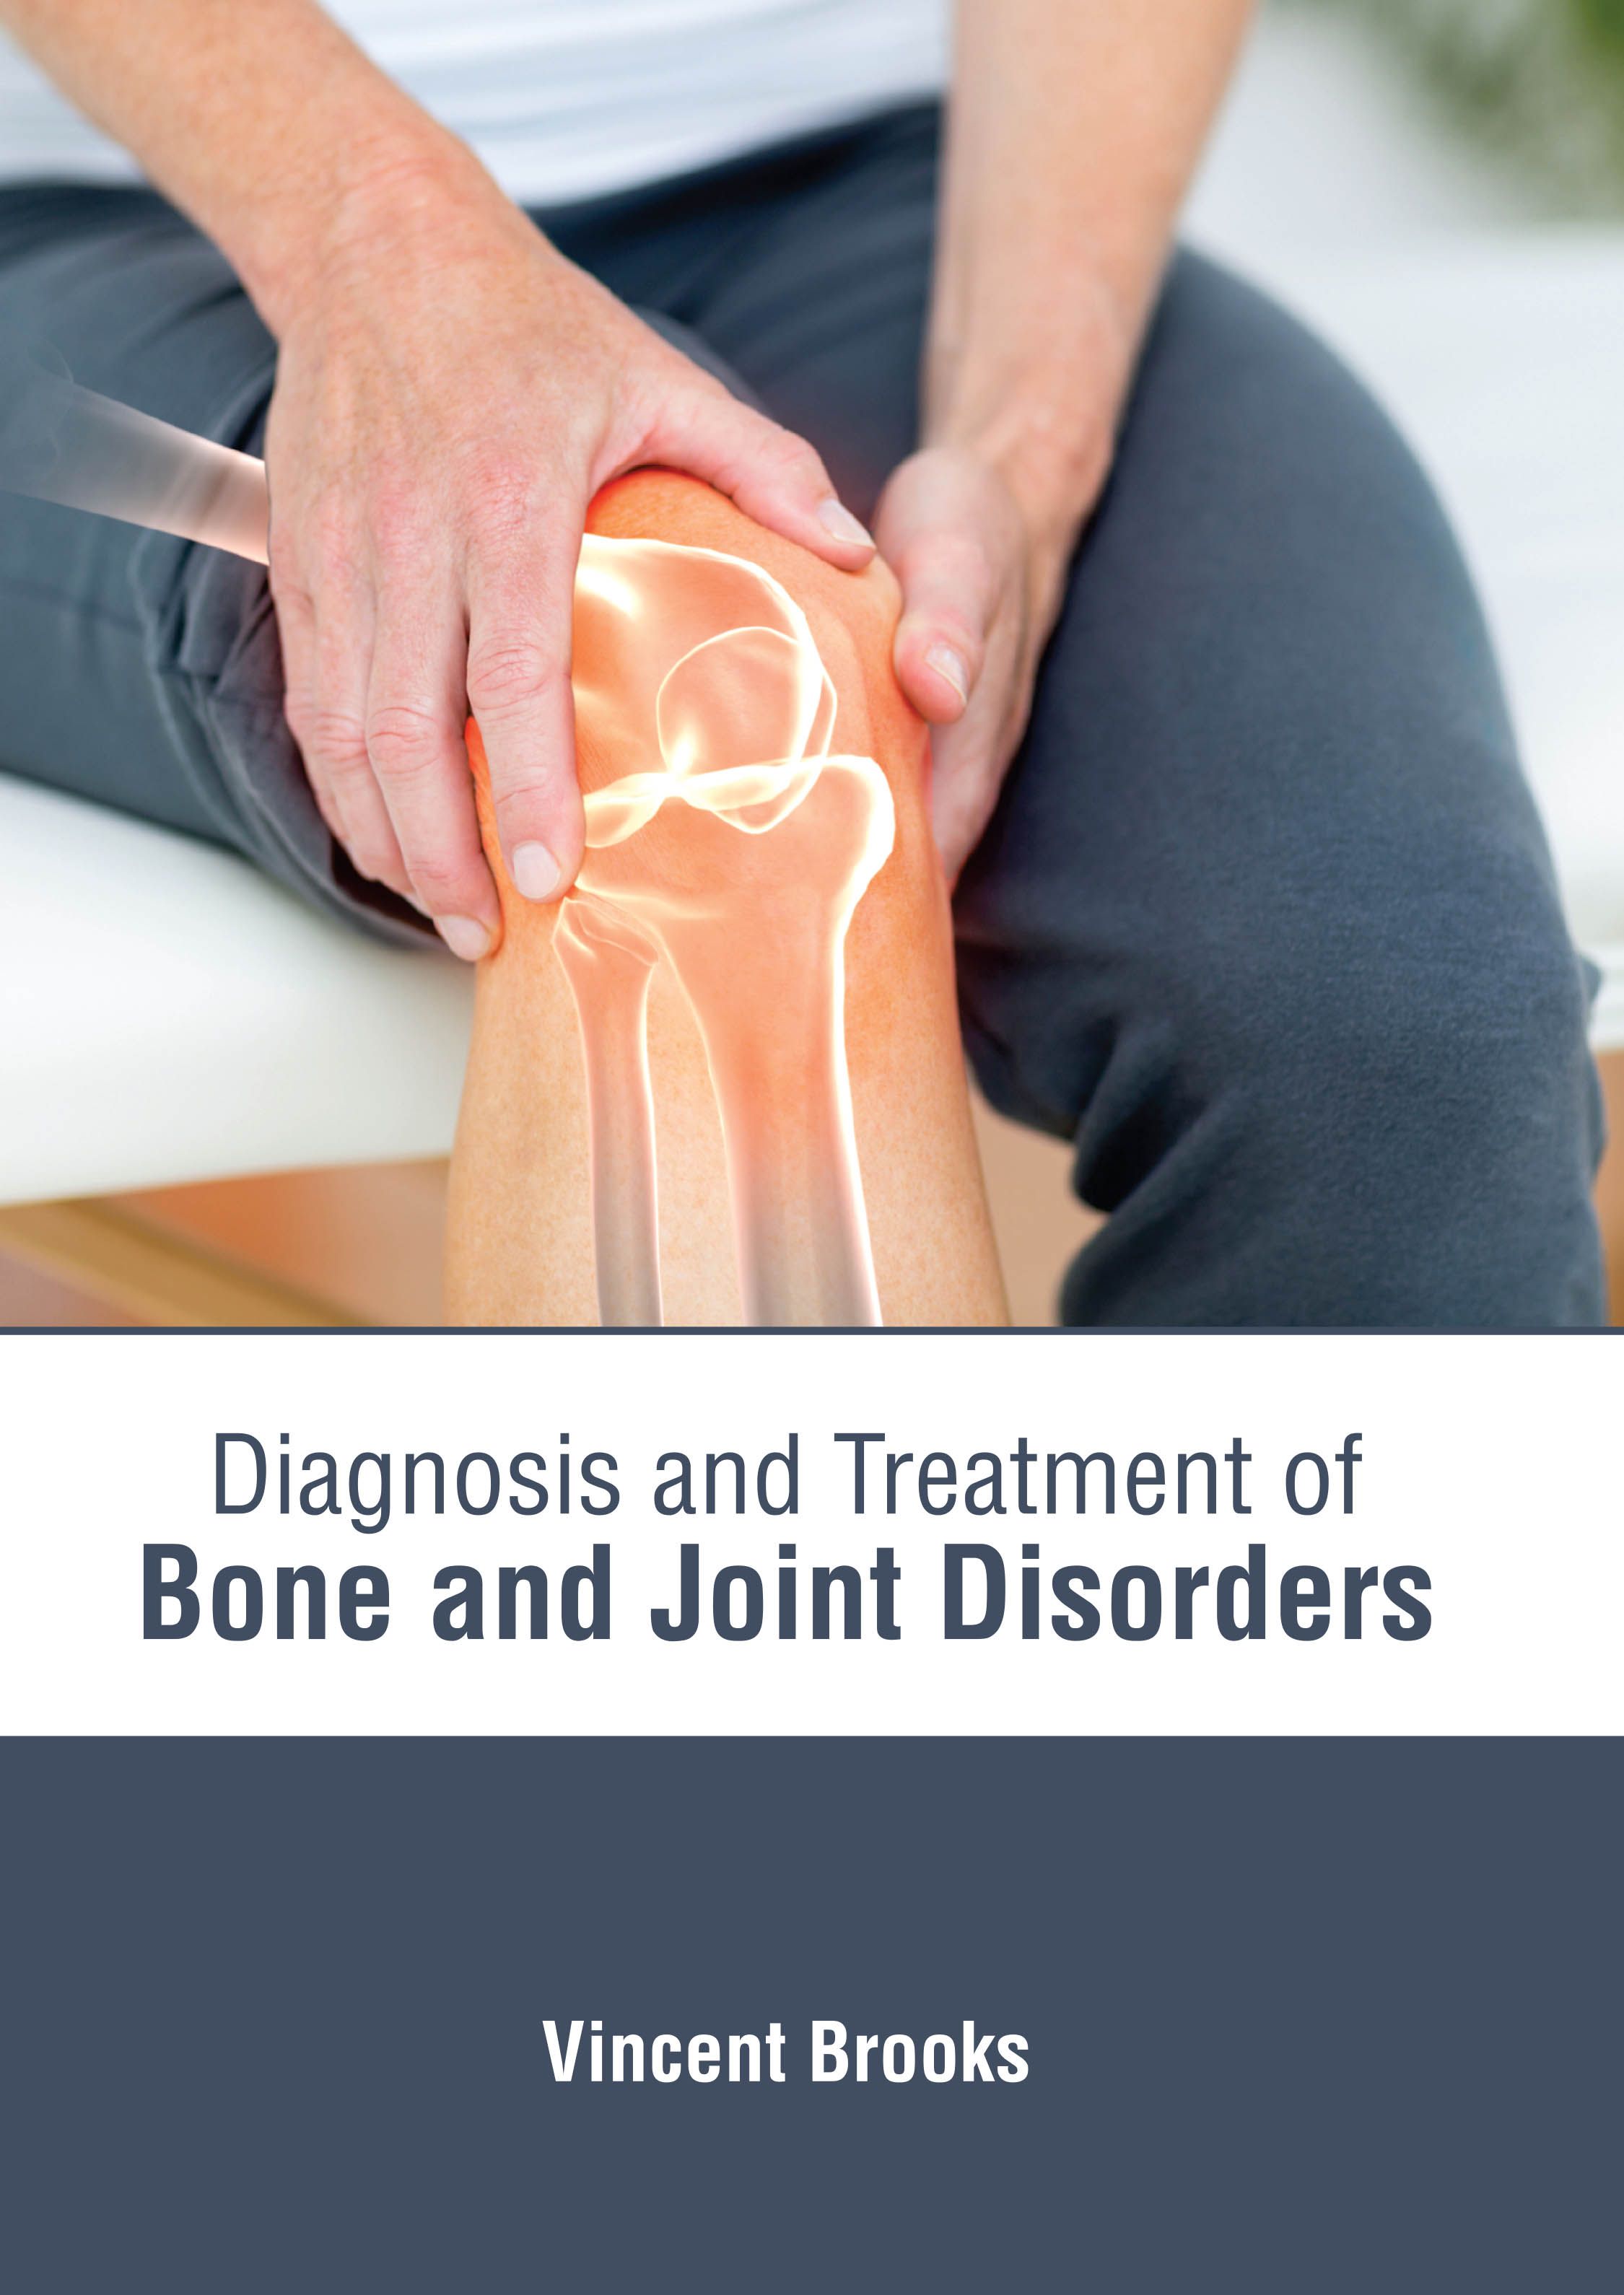 

exclusive-publishers/american-medical-publishers/diagnosis-and-treatment-of-bone-and-joint-disorders-9781639273935